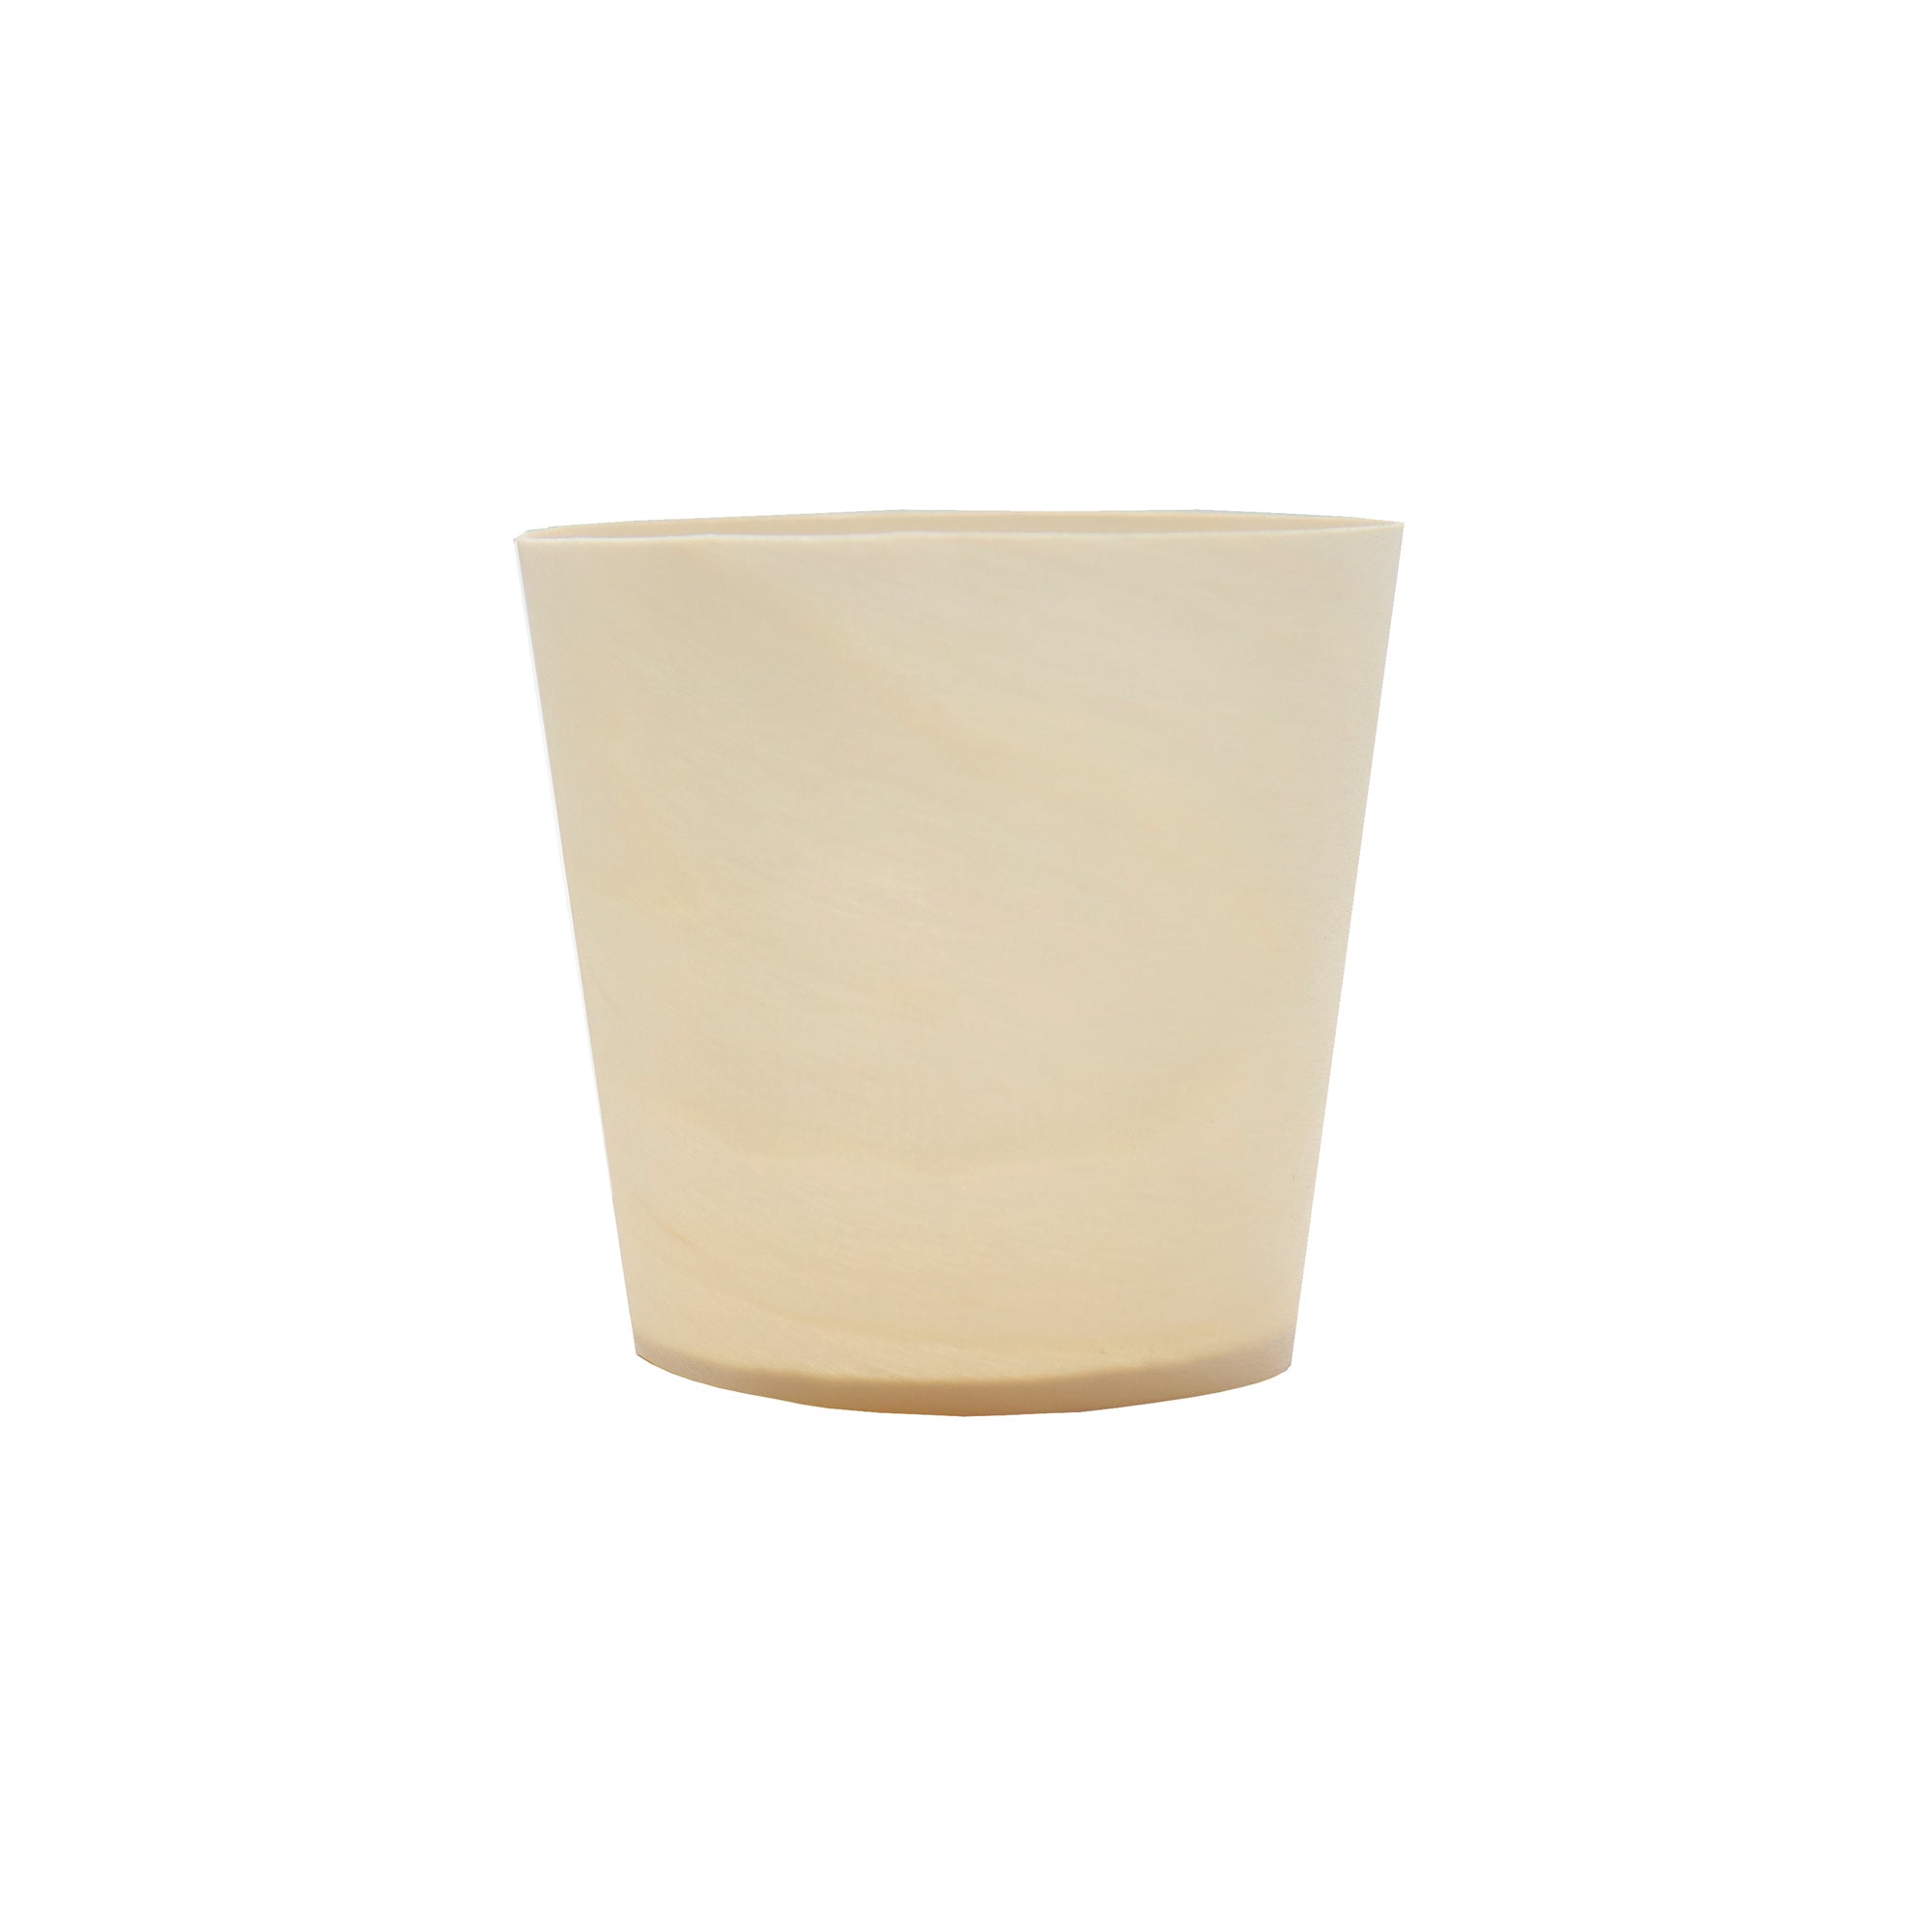 Disposable Bamboo Cups Medium 20pack